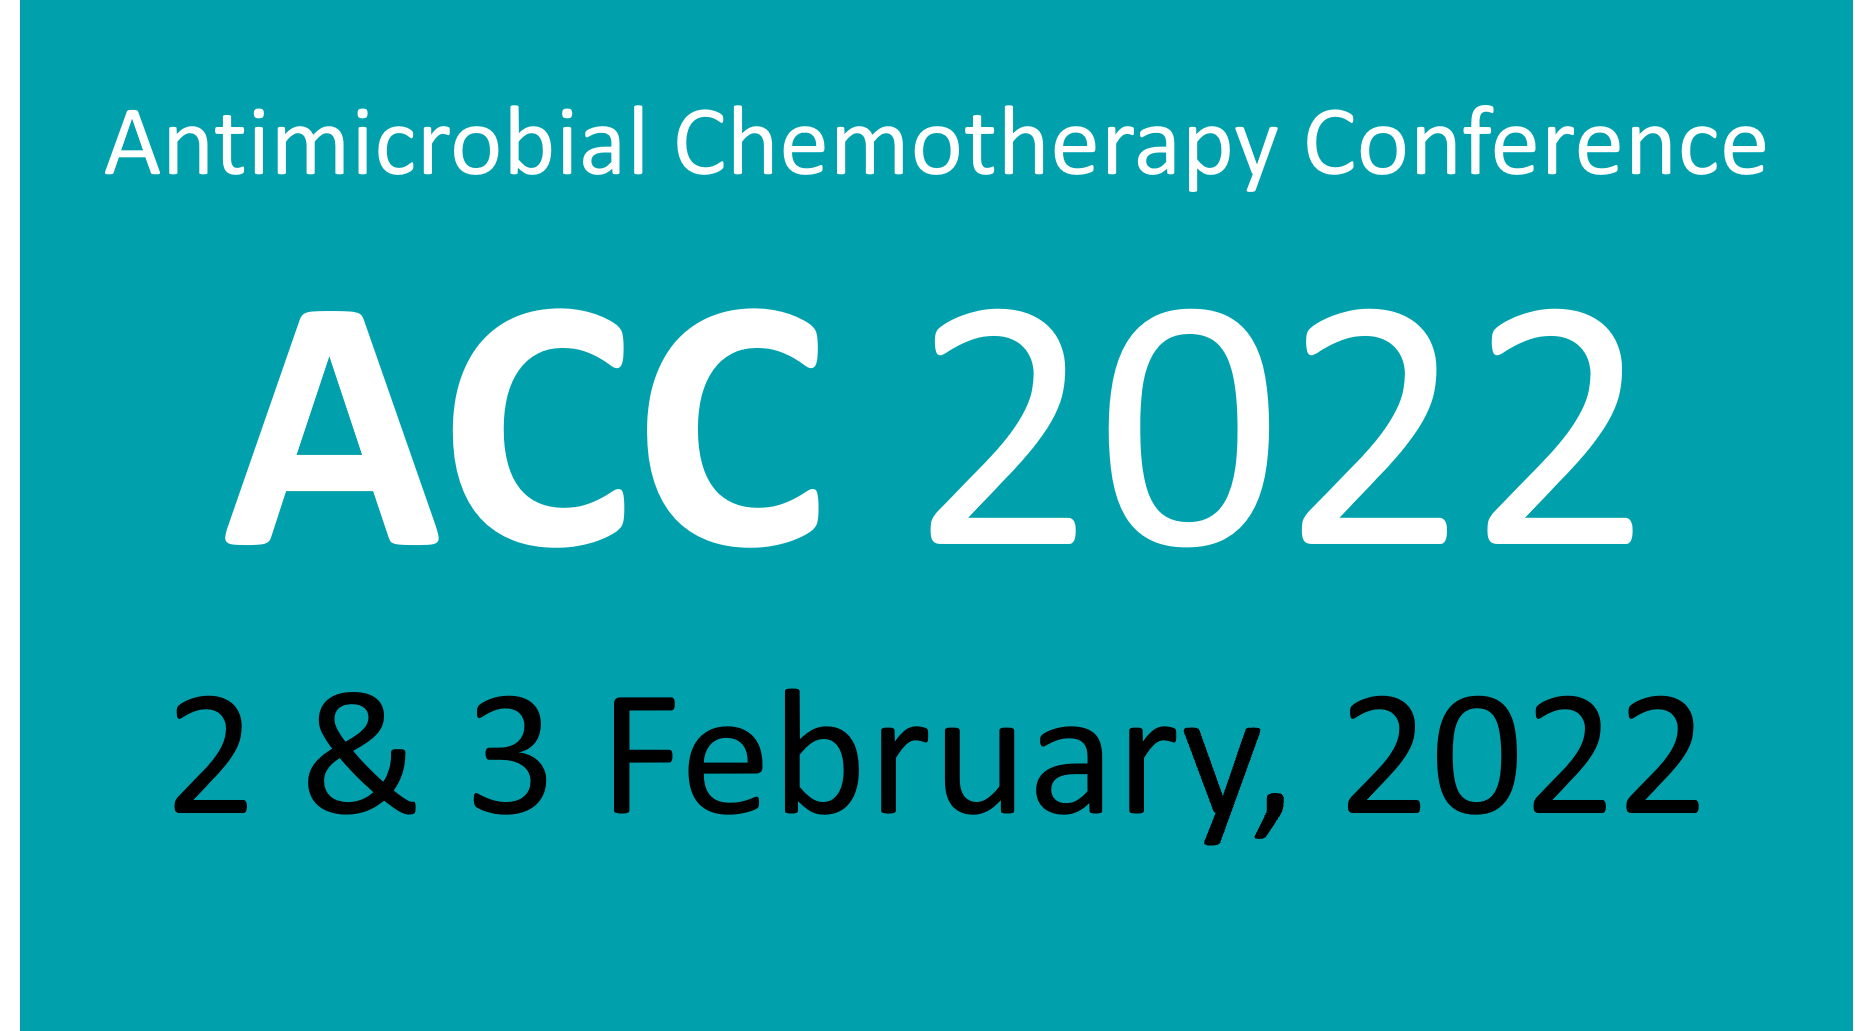 Antimicrobial Chemotherapy Conference 2022